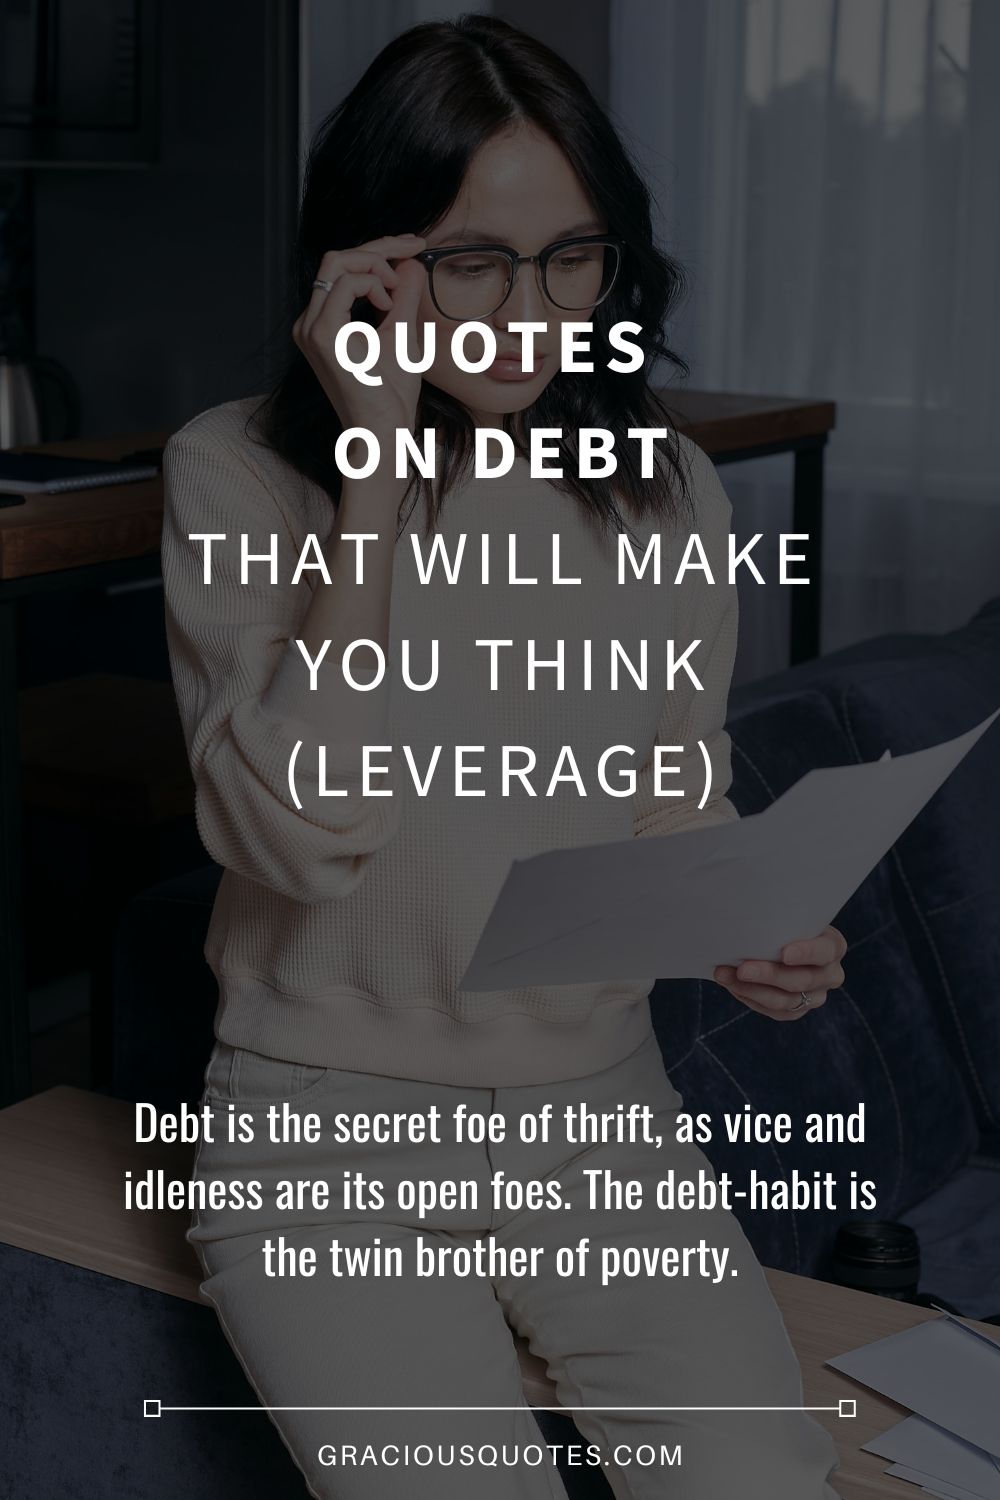 Quotes on Debt that Will Make You Think (LEVERAGE) - Gracious Quotes